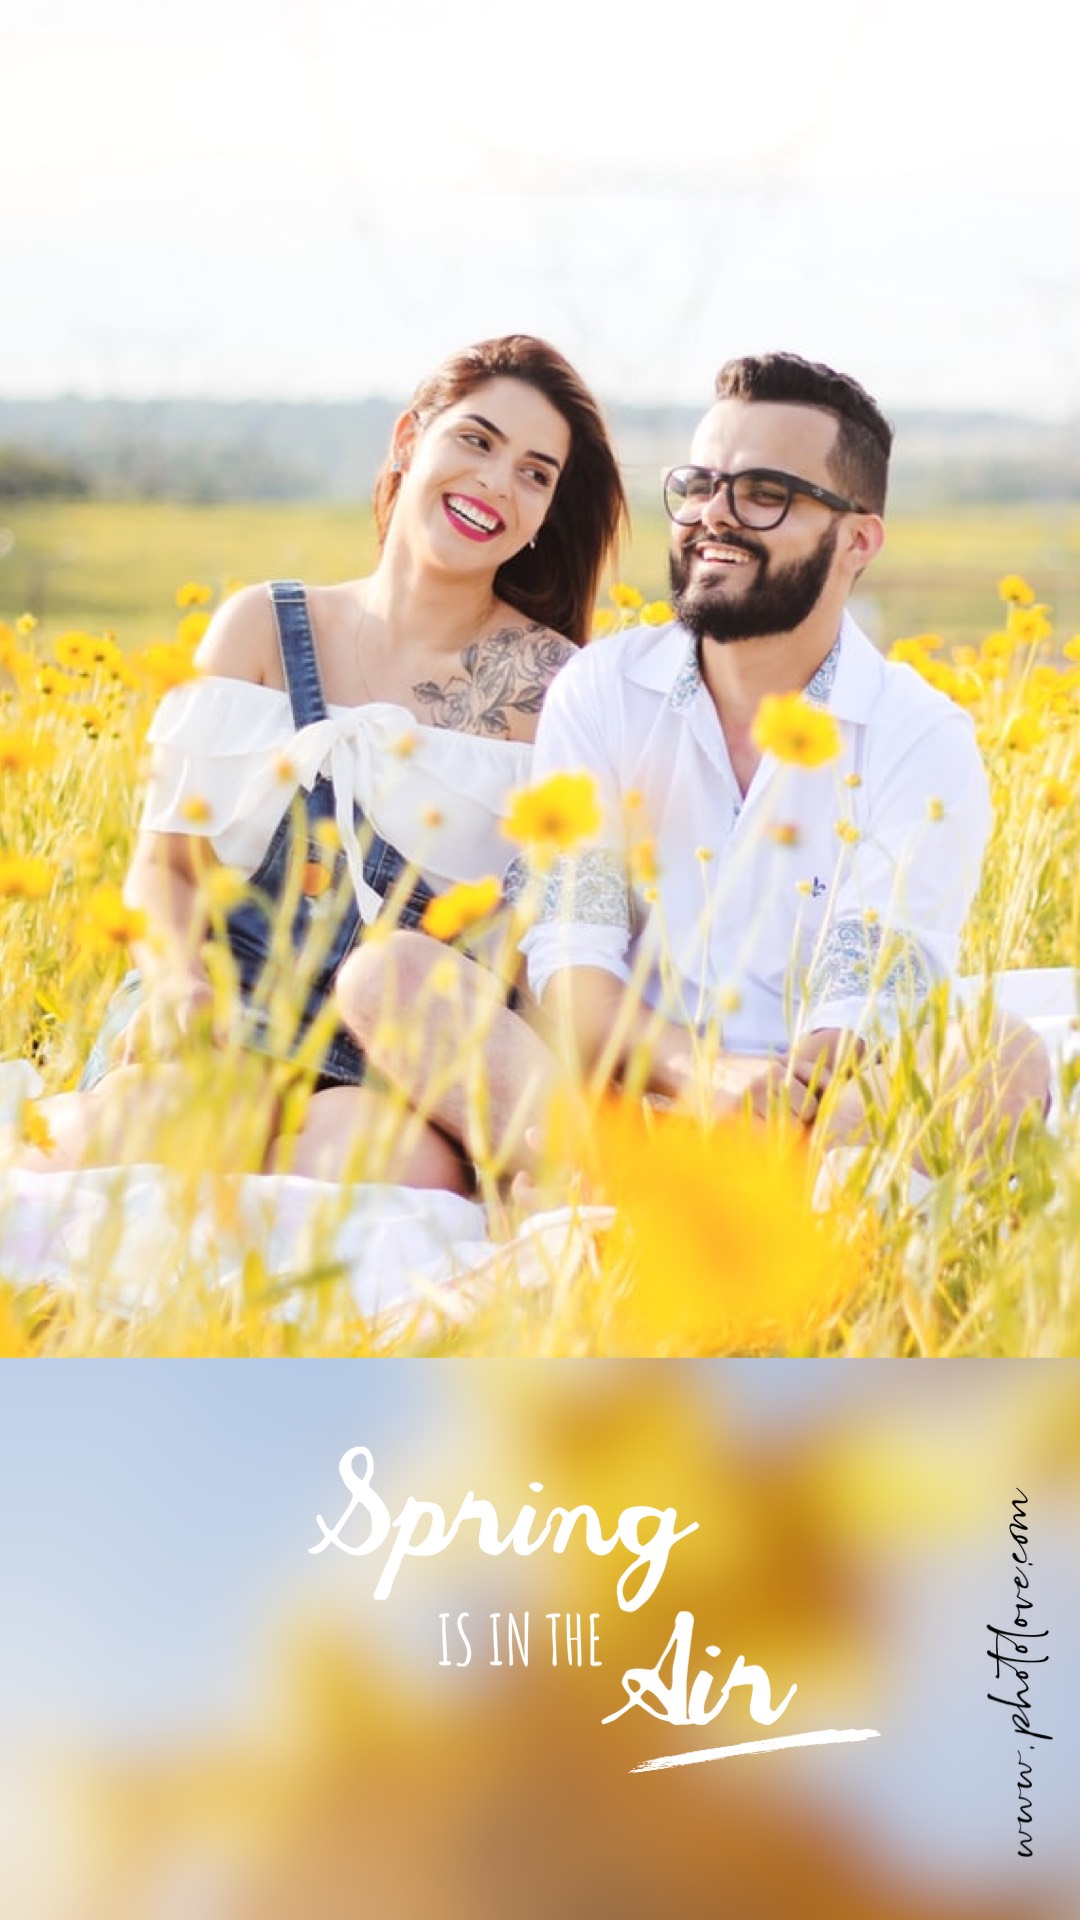 A Man And Woman Sitting In A Field Of Flowers Spring Story Template